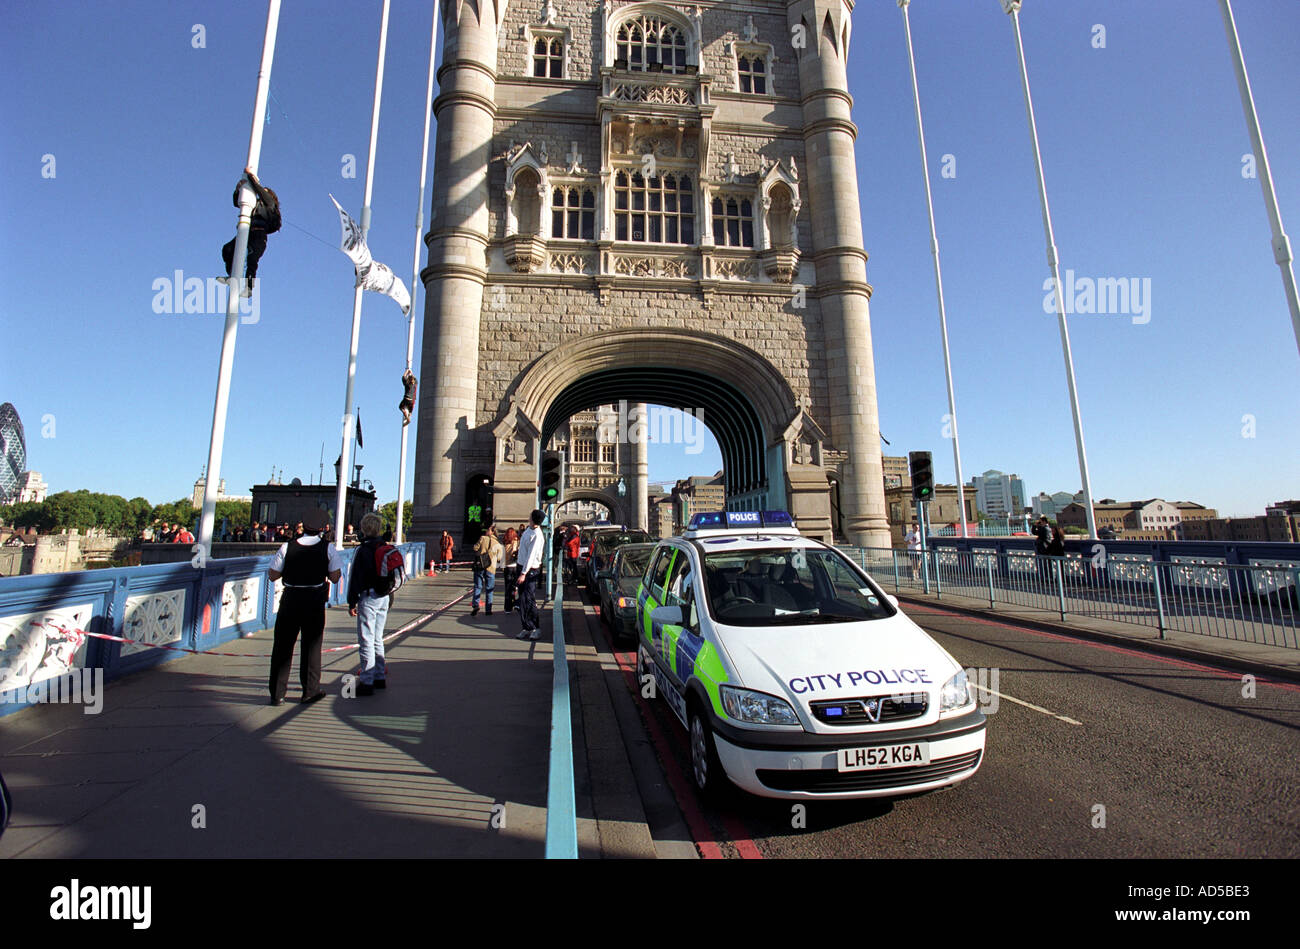 Protesters put up a banner on Tower Bridge in London Britain UK Stock Photo